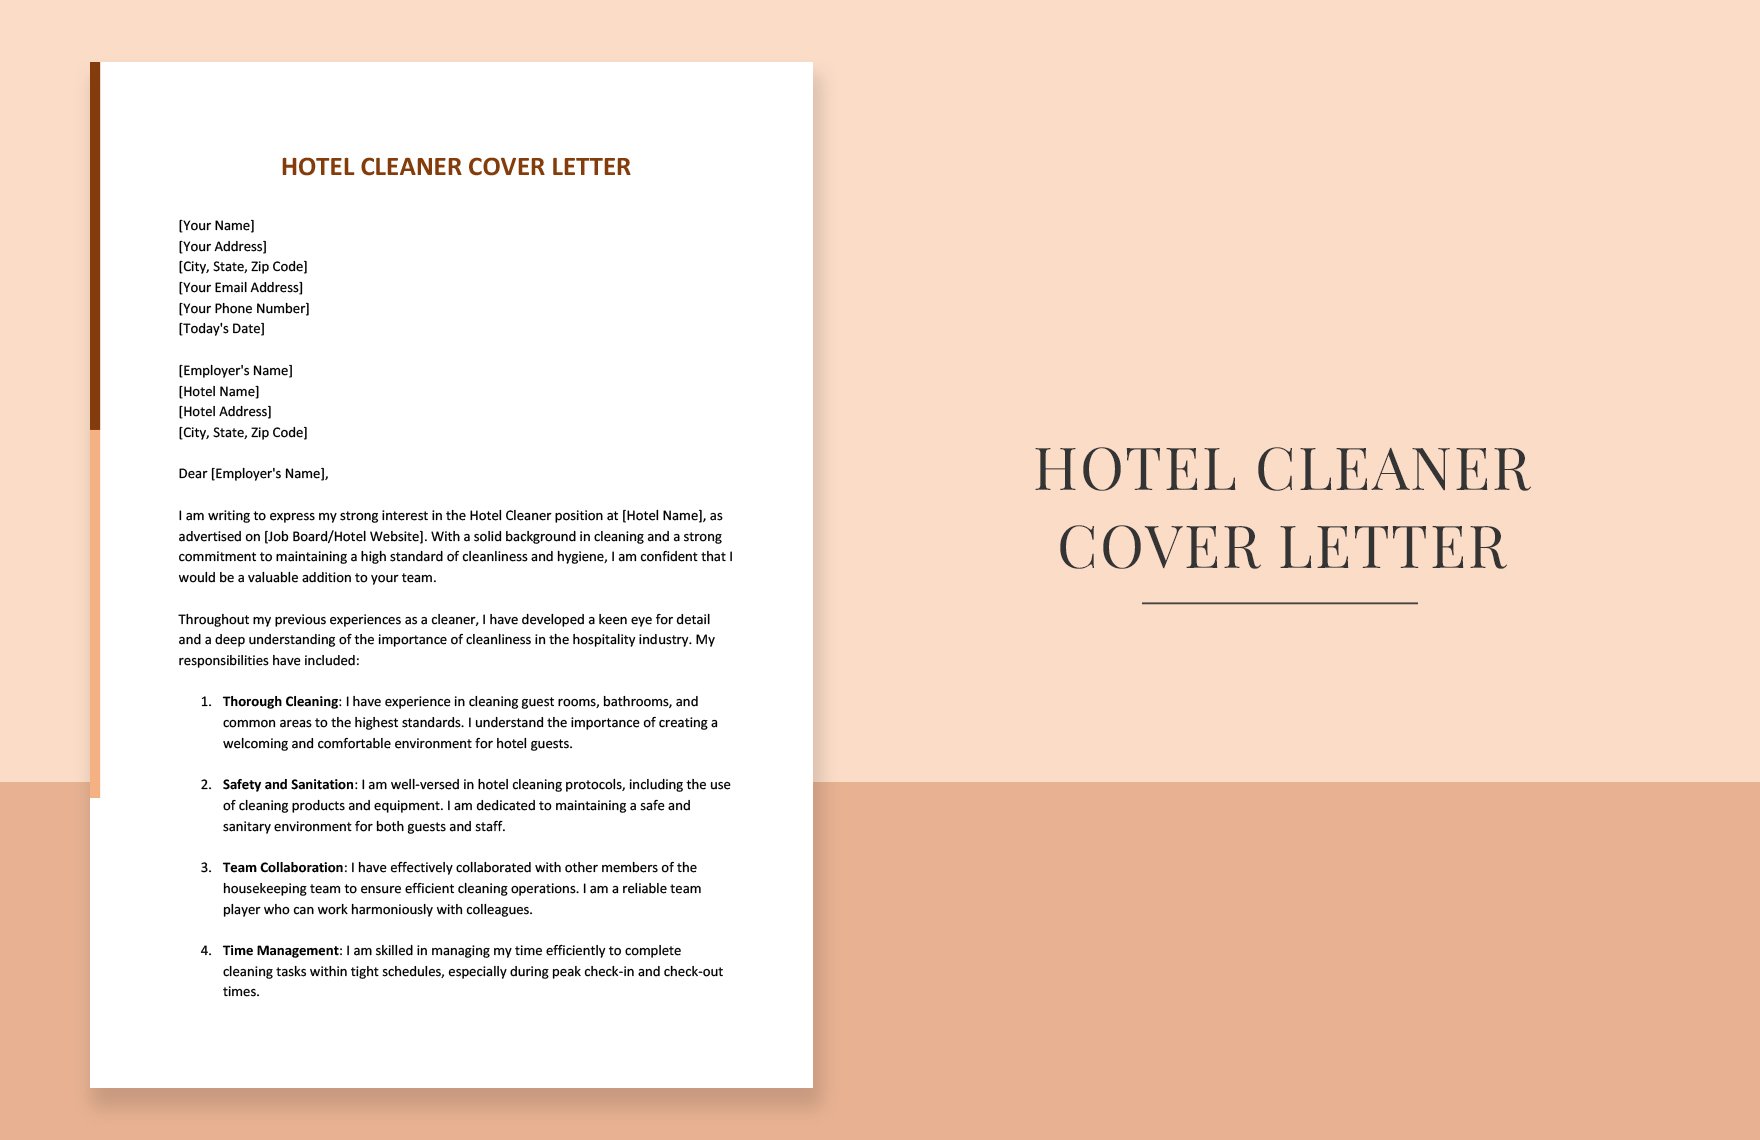 Hotel Cleaner Cover Letter in Word, Google Docs